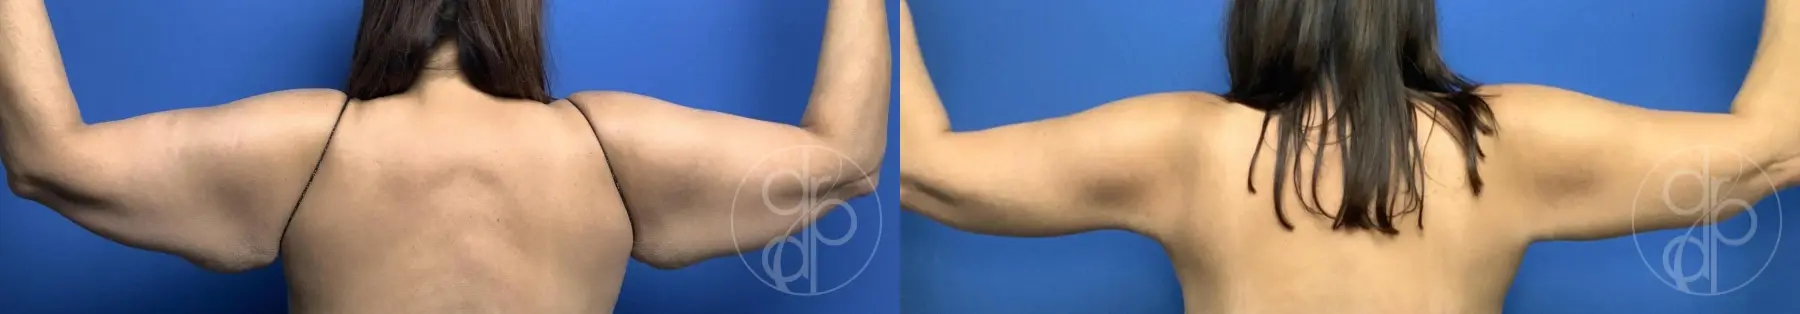 Brachioplasty: Patient 3 - Before and After 2